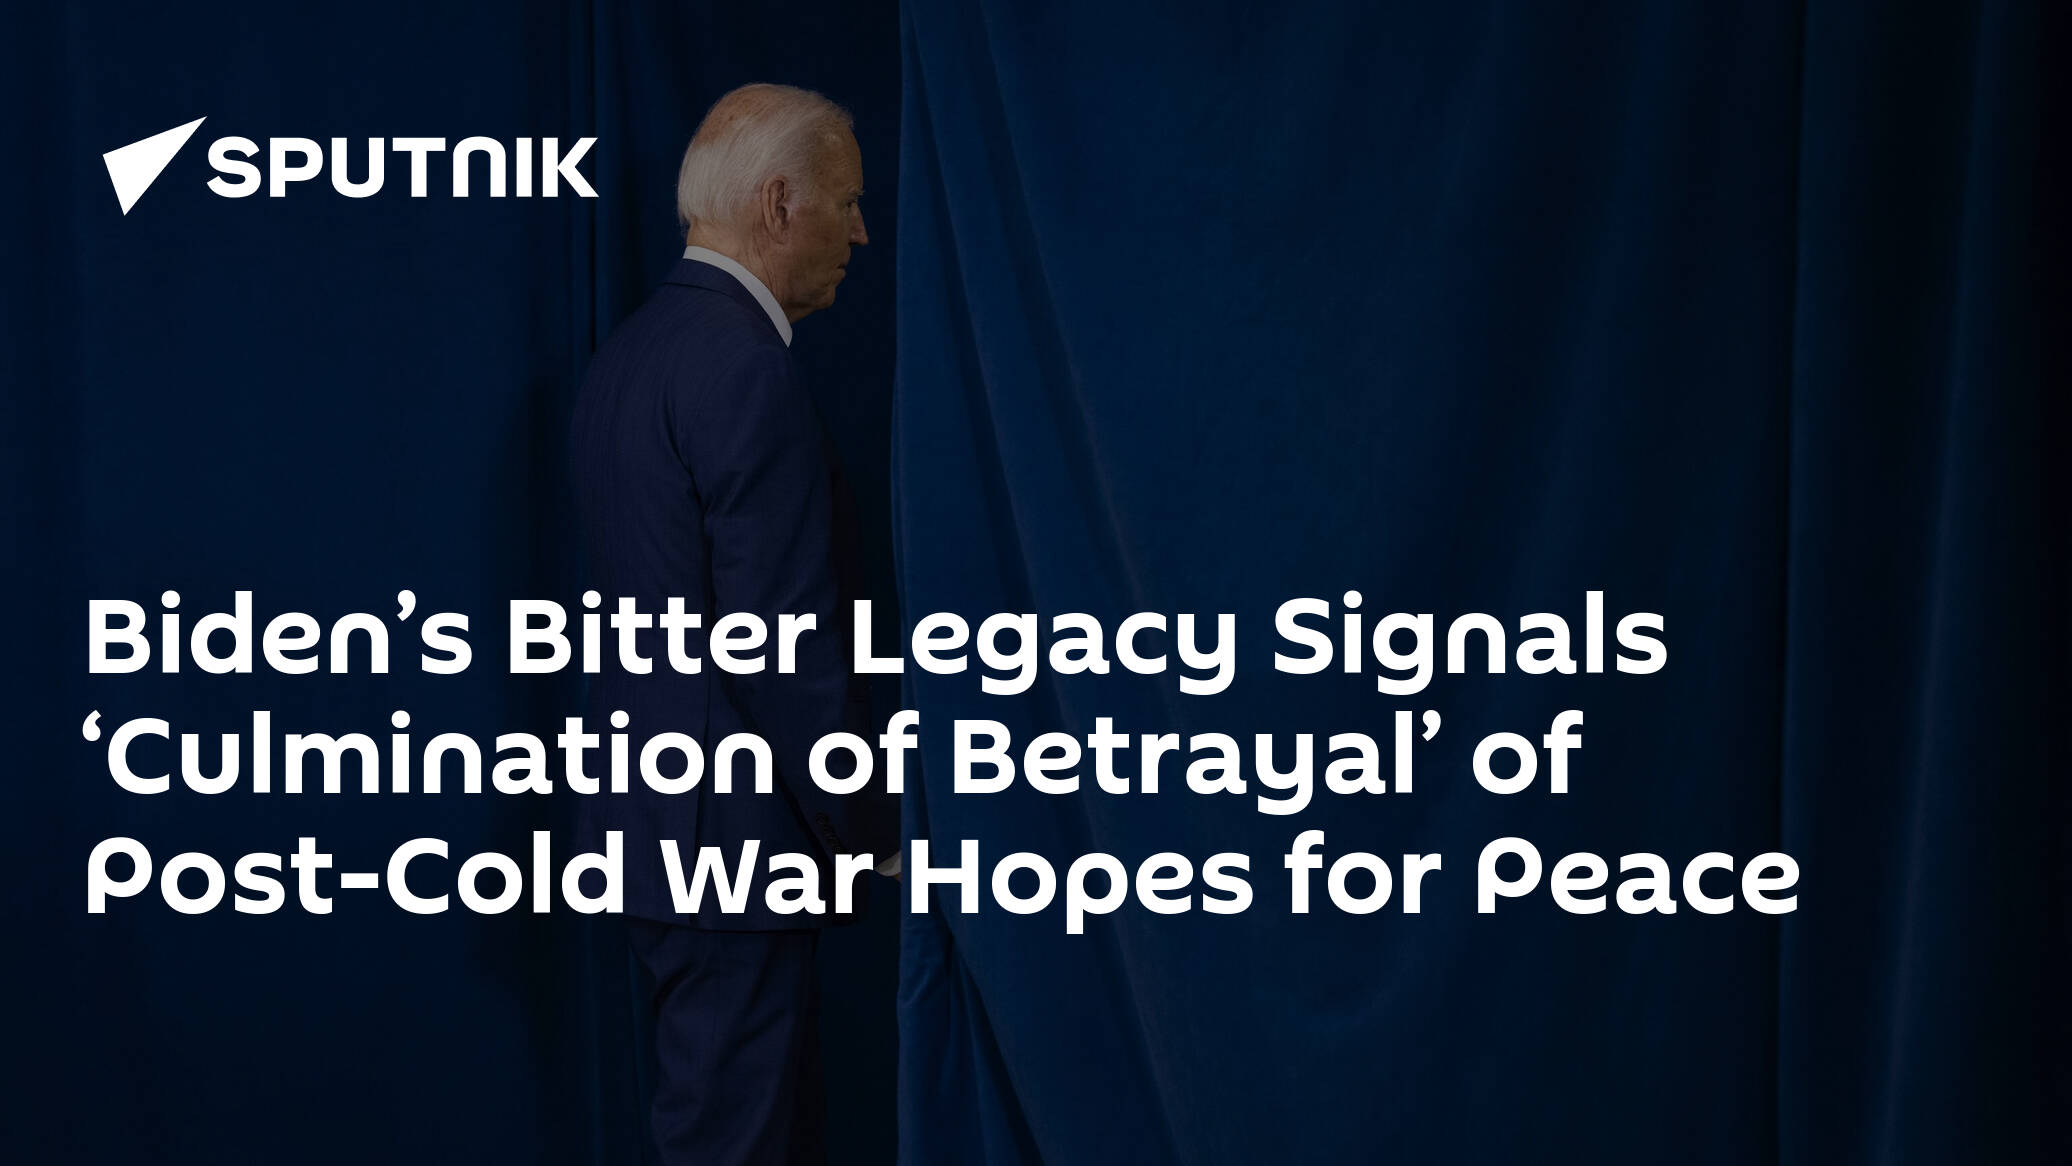 Biden’s Bitter Legacy Signals ‘Culmination of Betrayal’ of Post-Cold War Hopes for Peace